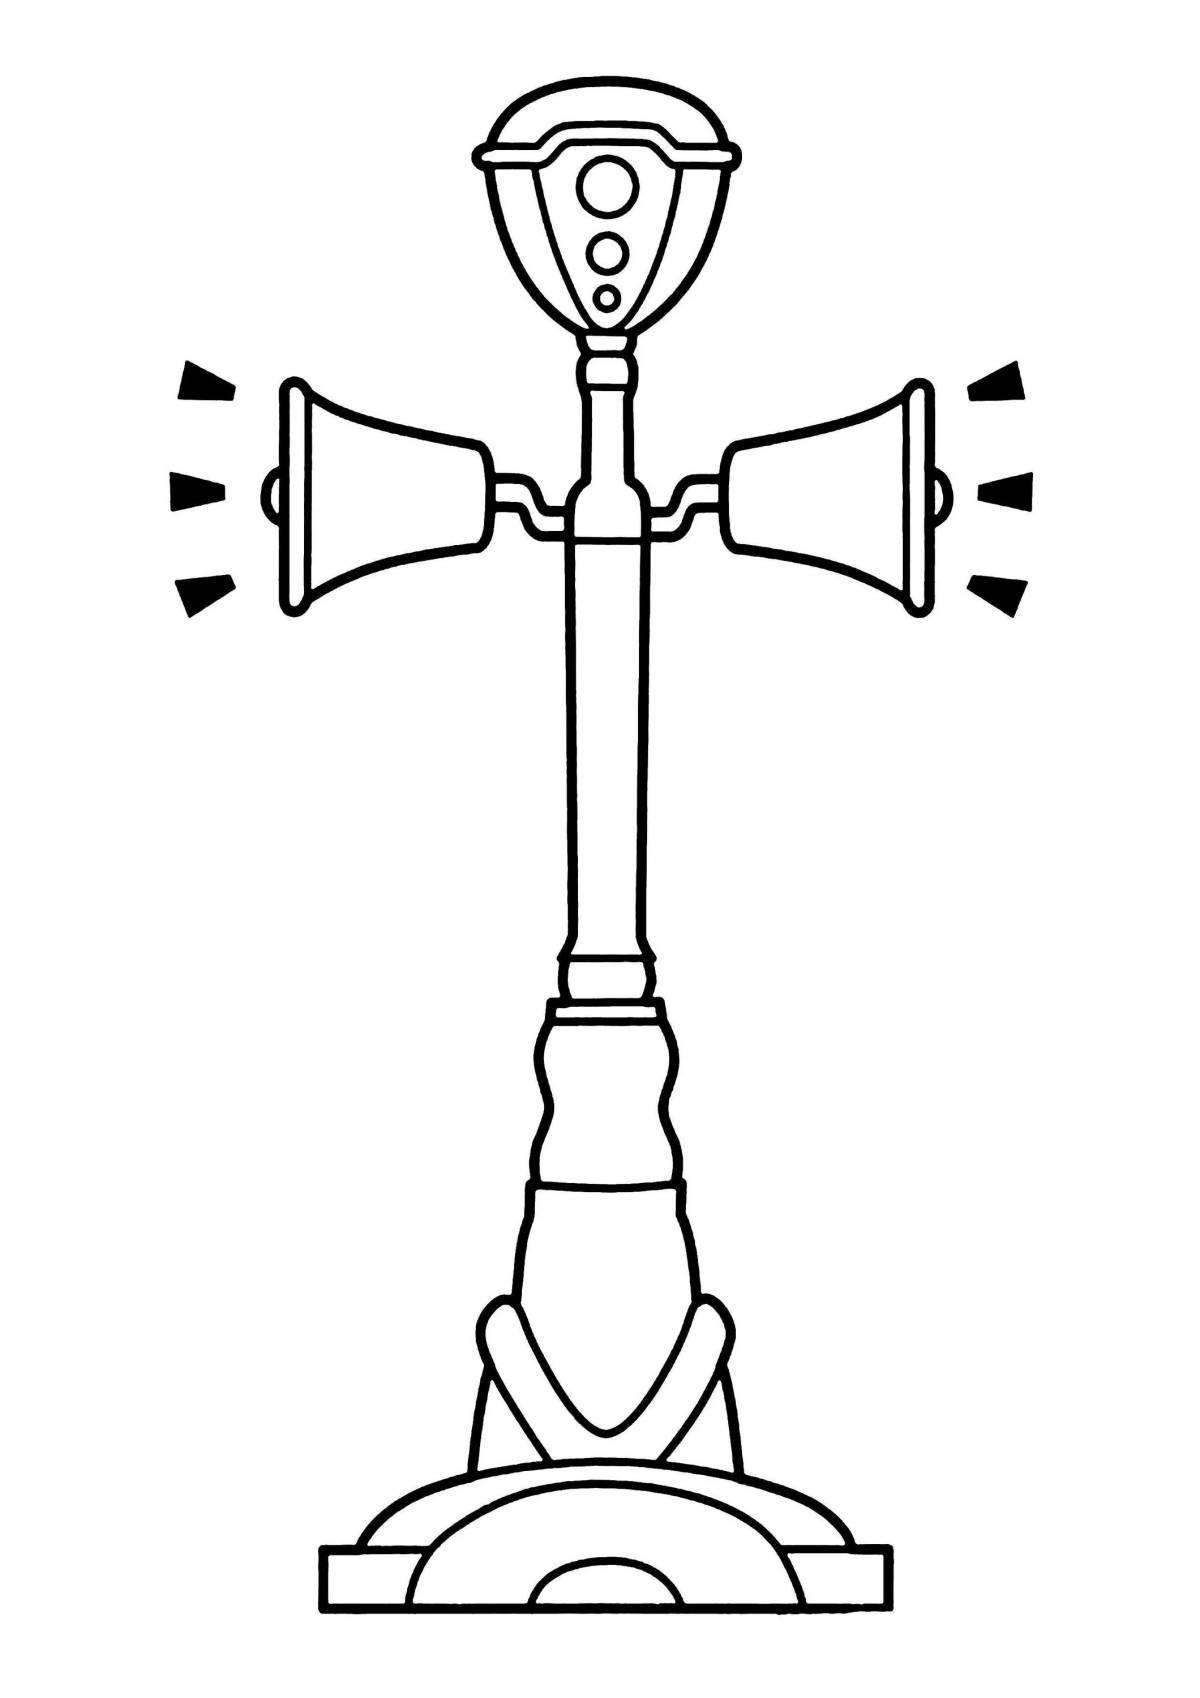 Magic traffic light coloring page